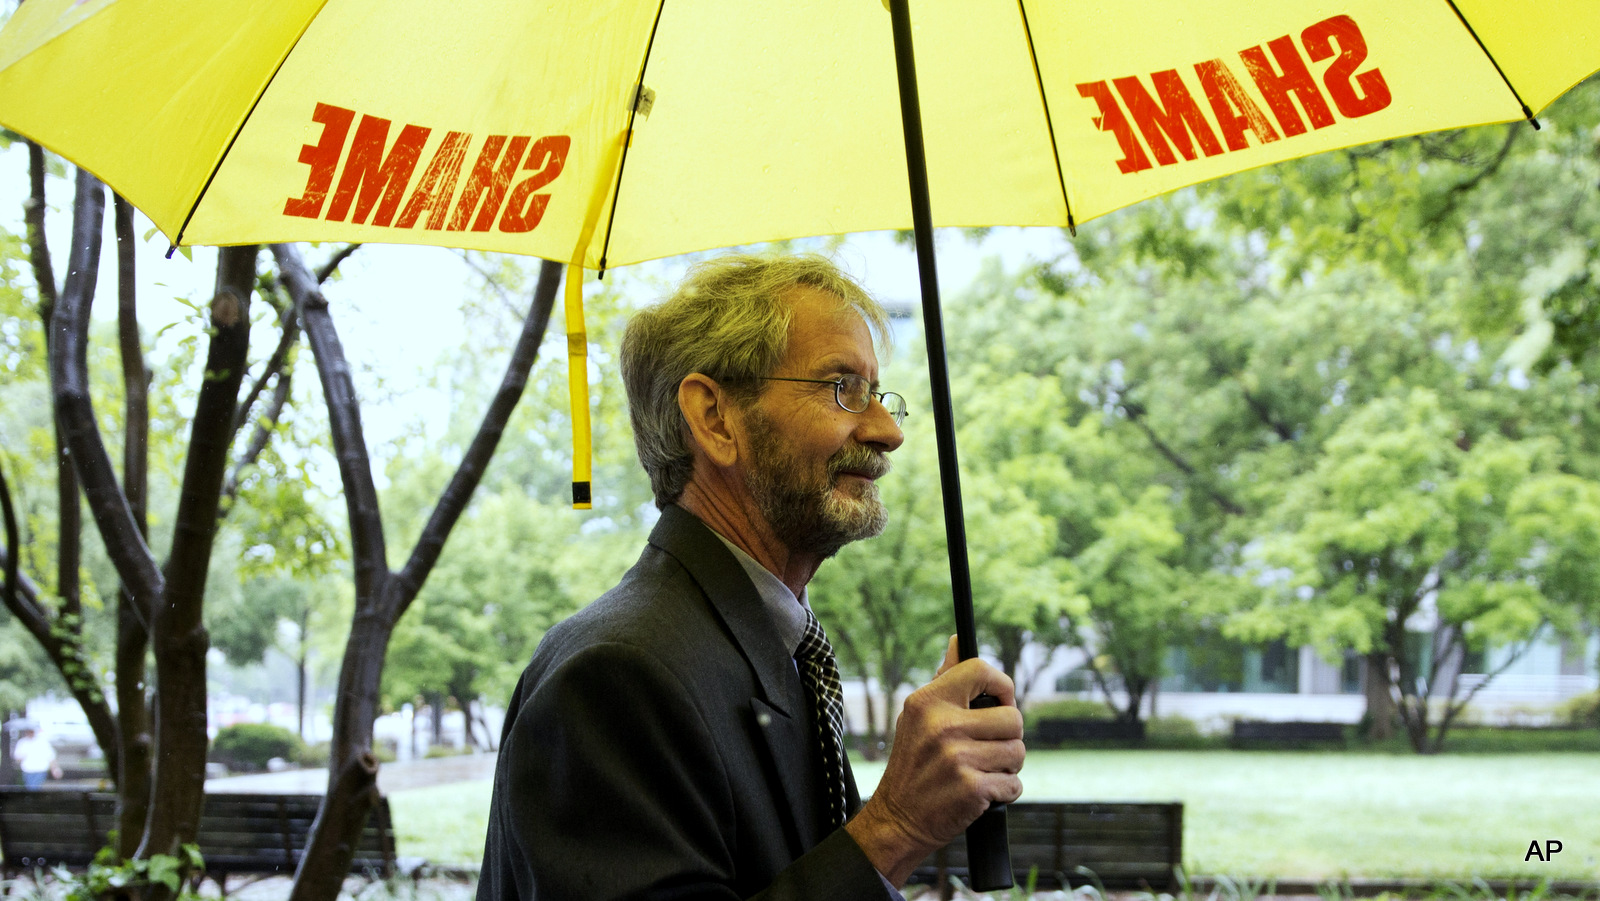 Carrying an umbrella that says "shame" on it, Douglas Hughes of Florida arrives at federal court in Washington